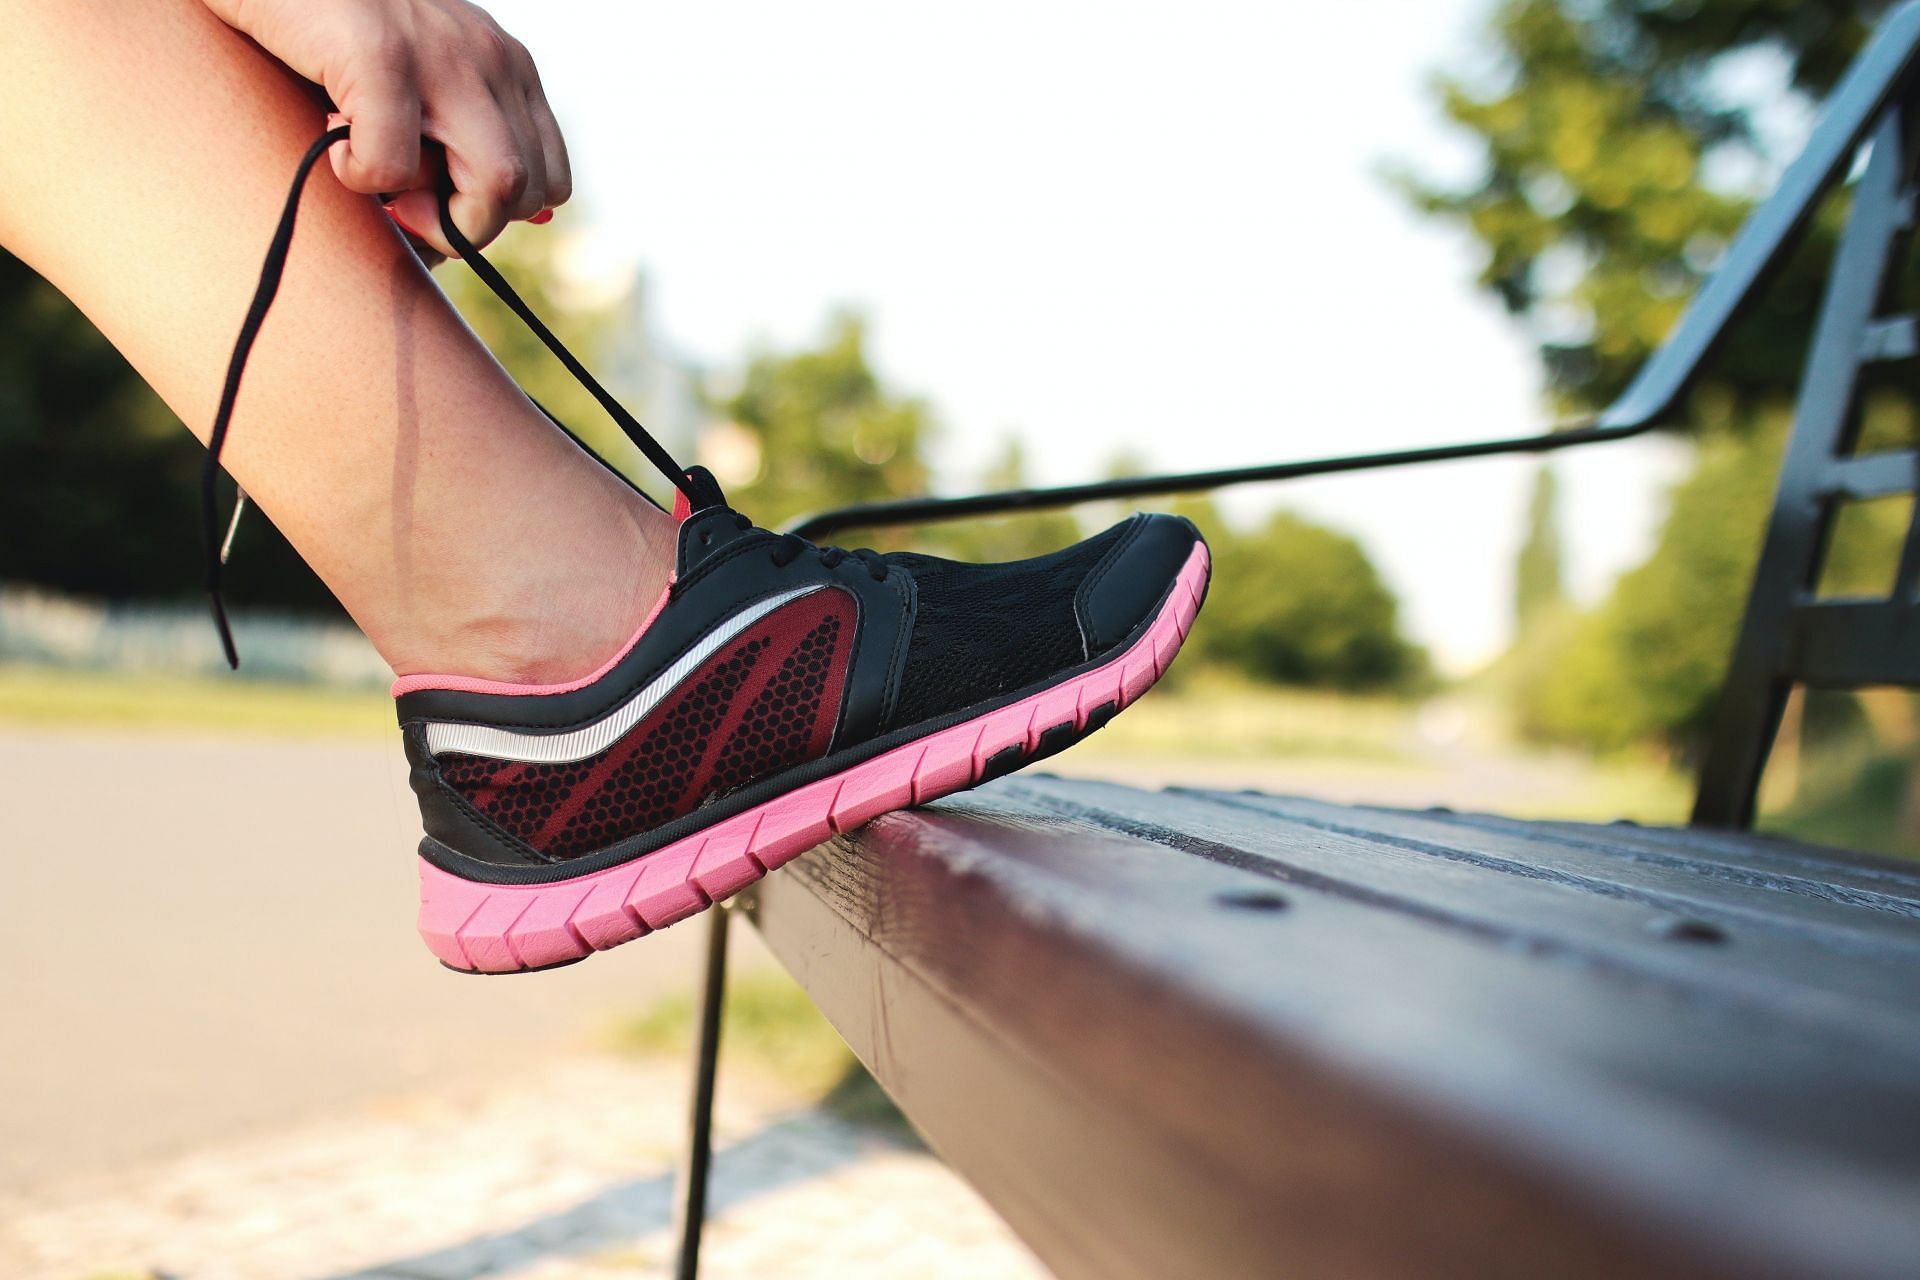 Importance of the right shoes for jogging for women (image sourced via Pexels / Photo by jeshoots)